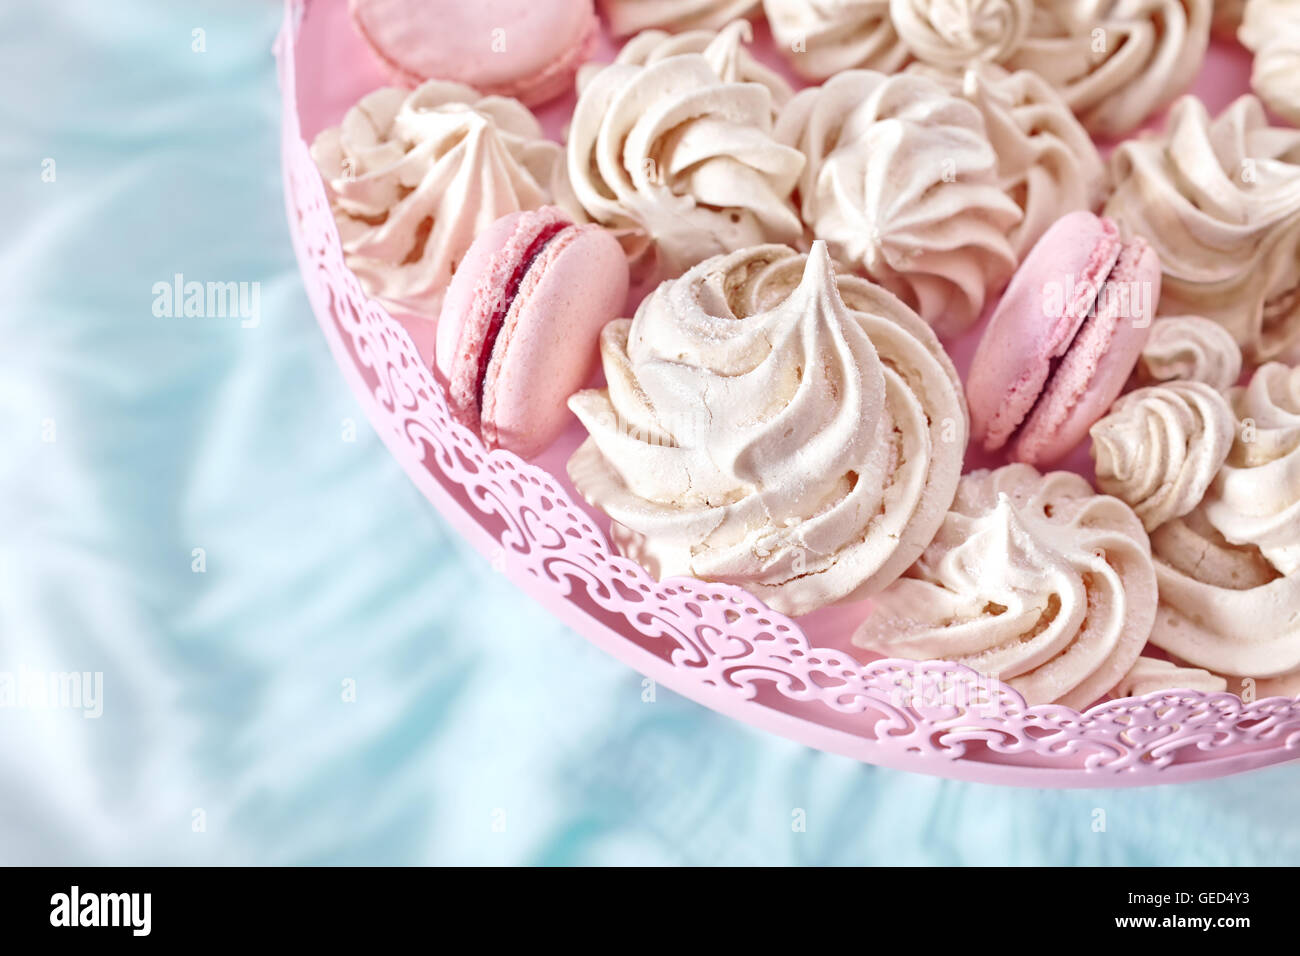 Homemade pink and white meringues on a plate, space for text. Stock Photo